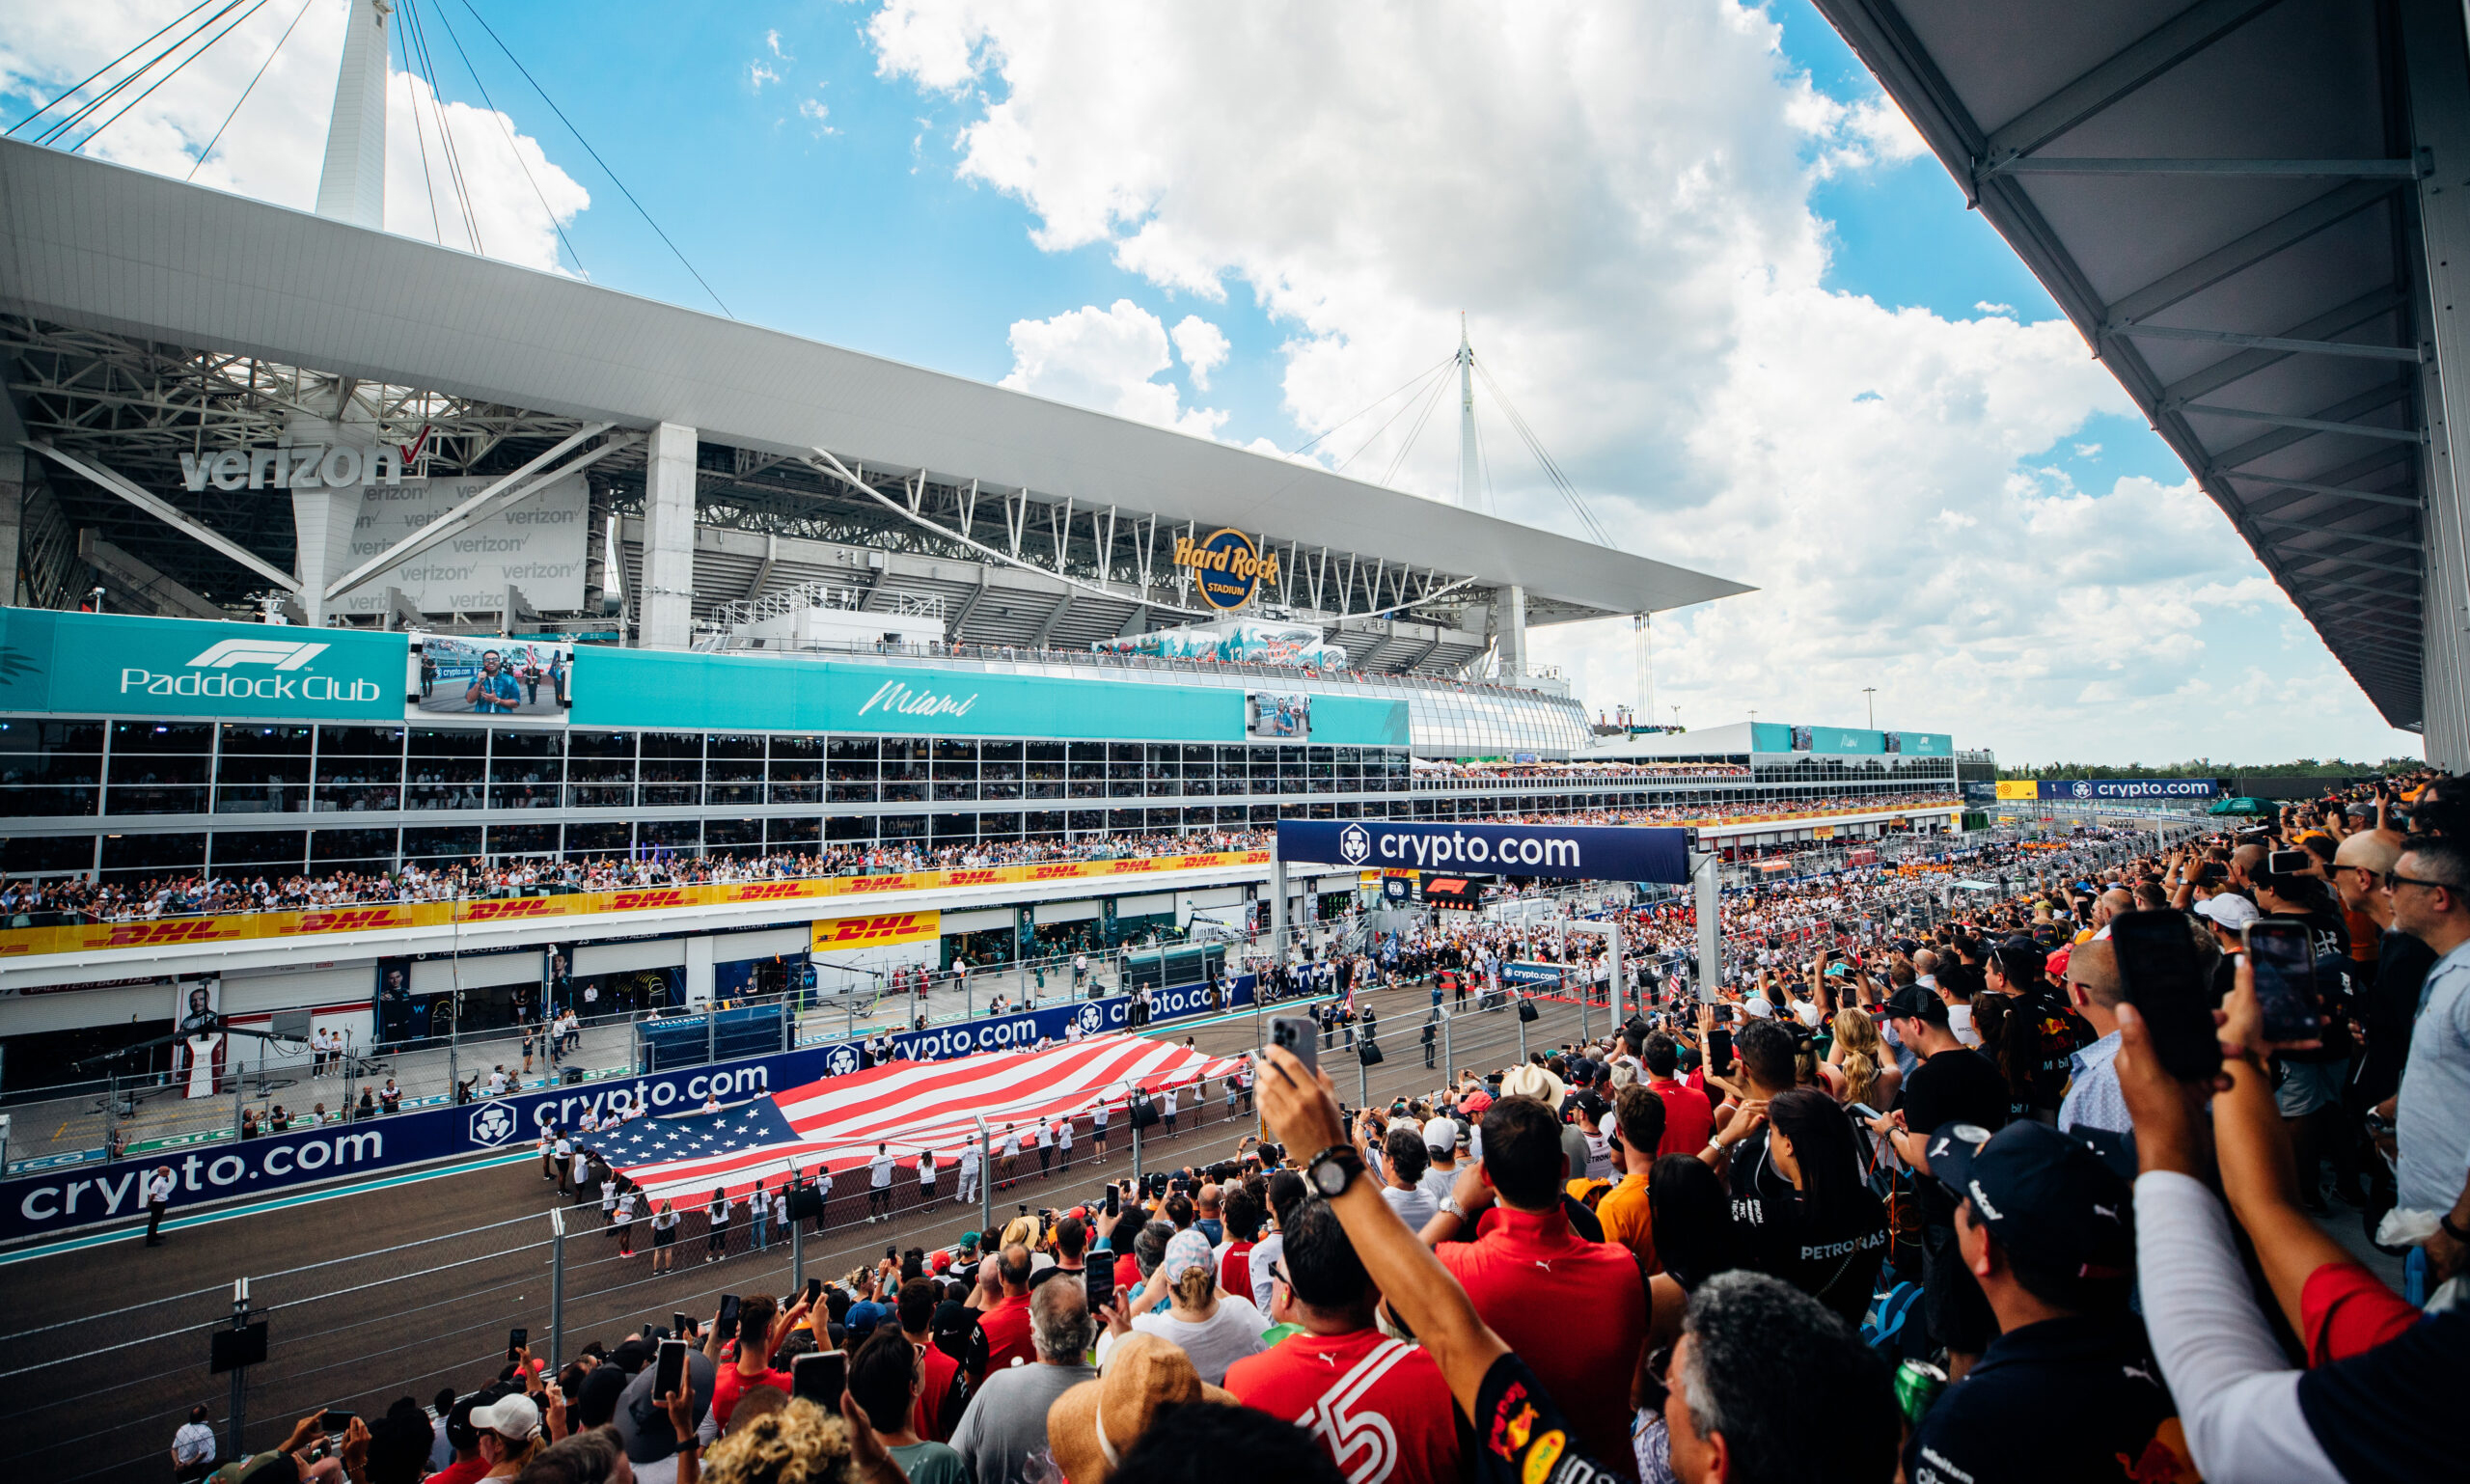 F1 Miami Grand Prix: With U.S. Interest at All-Time High, Formula 1's  Broadcast and Media Team Puts Pedal to the Metal